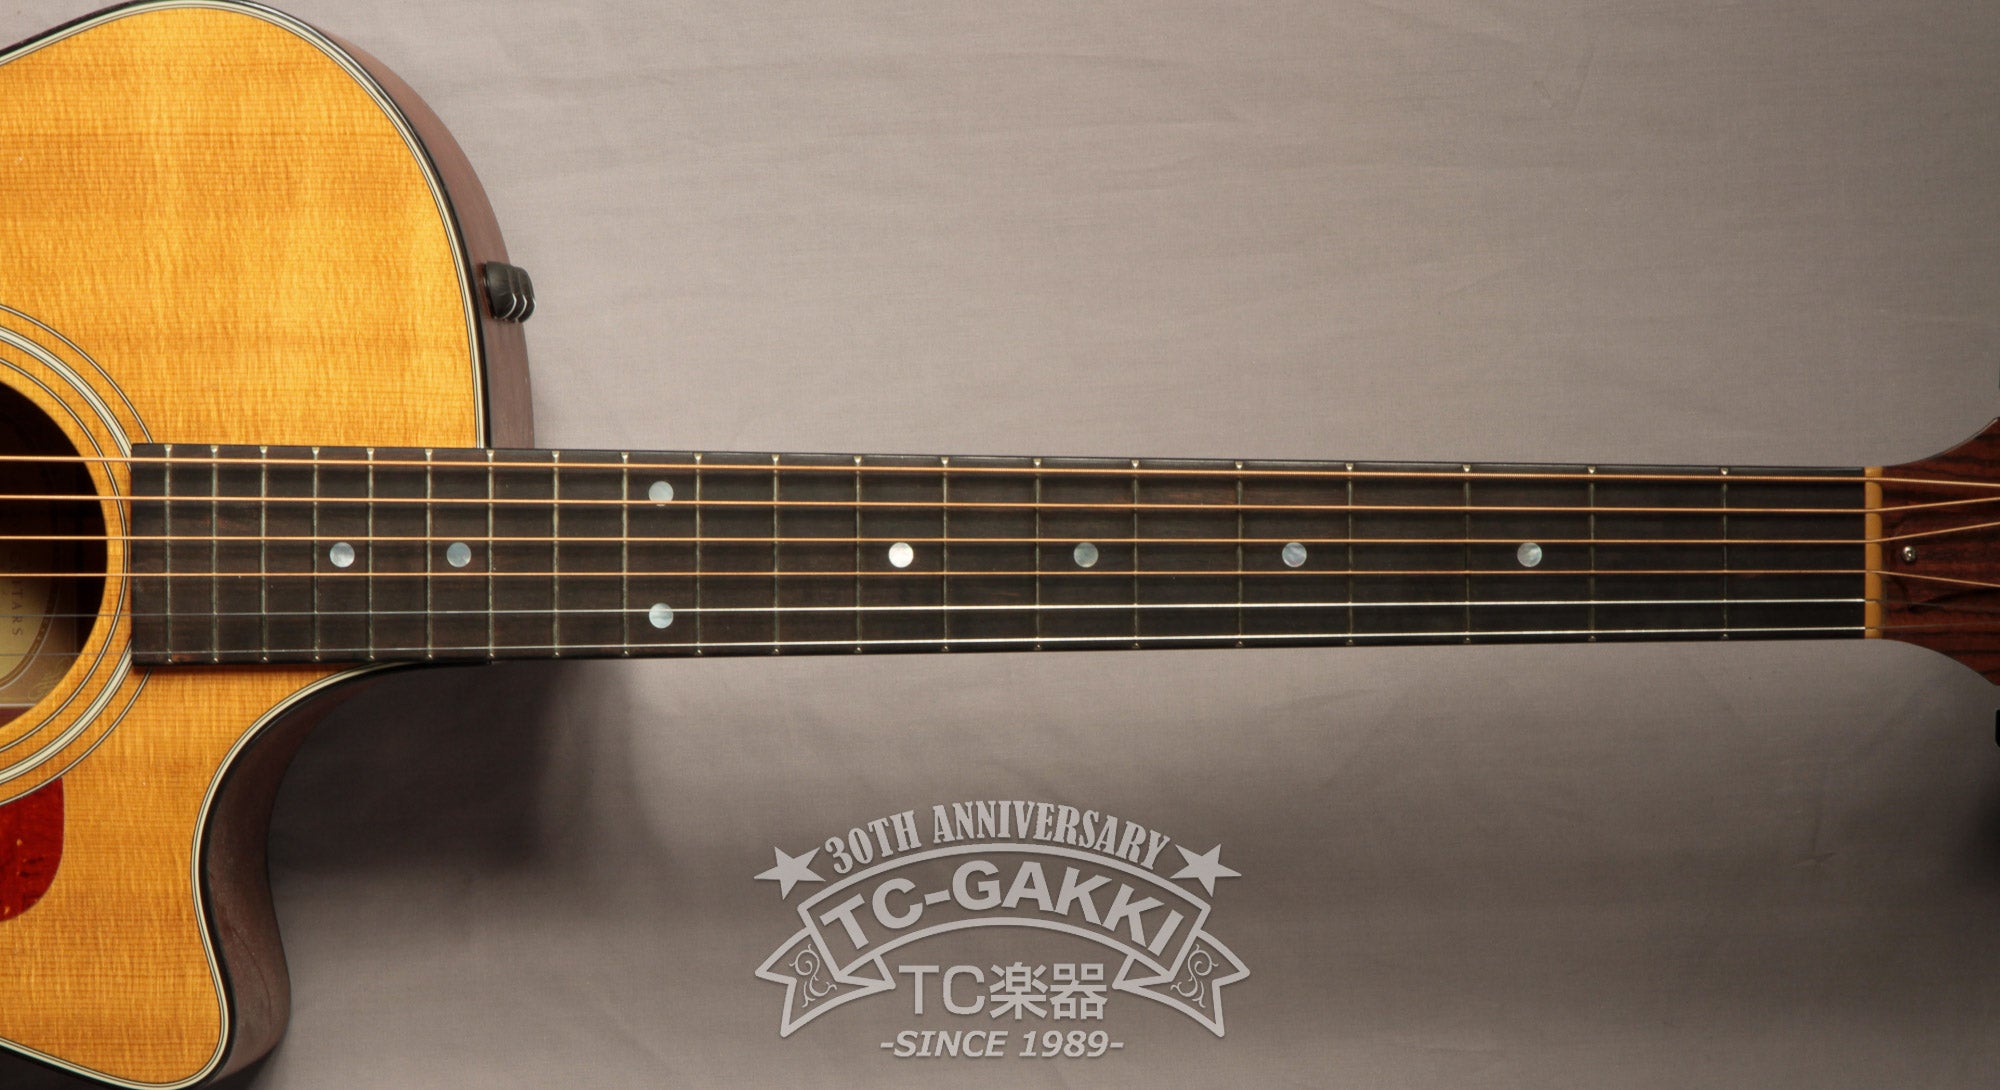 Taylor 314ce With ES3 Preamp 2011 0 Guitar For Sale TCGAKKI